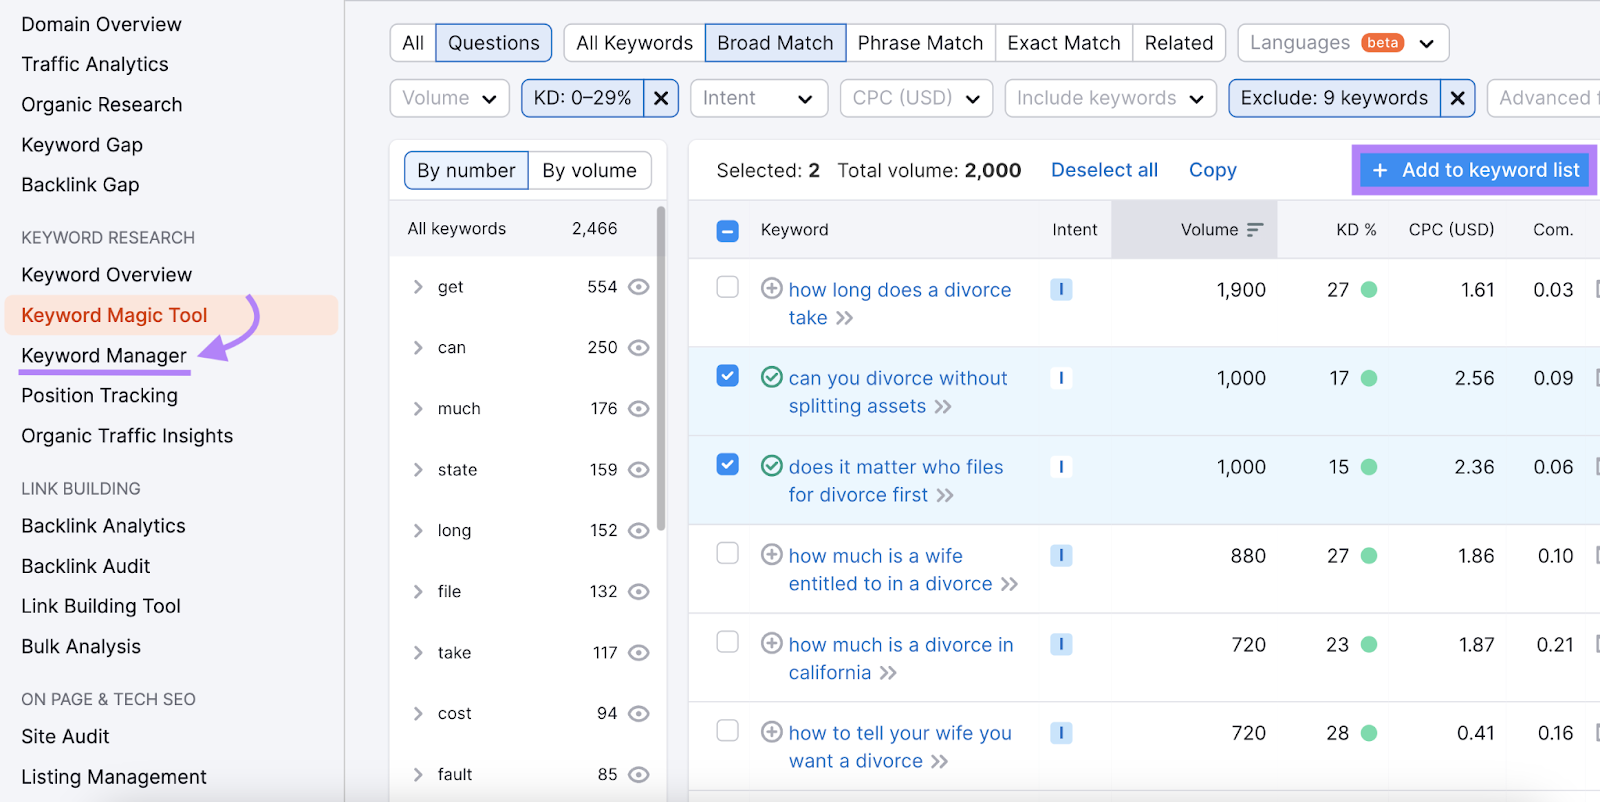 Add keywords to a list in Keyword Manager tool